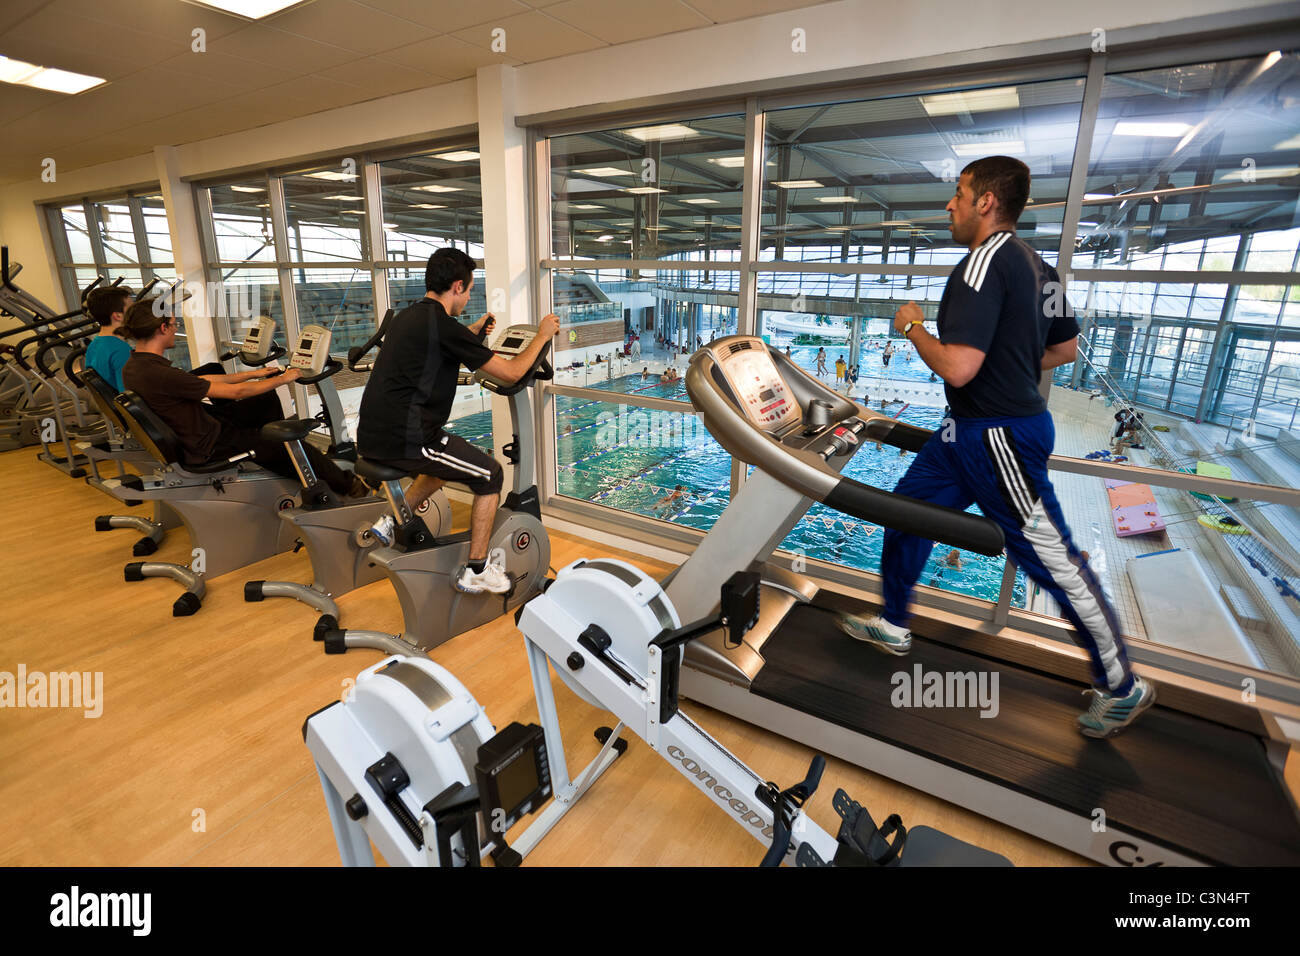 Weights and cardio training room of the Vichy - Val d'Allier swimming pool. Salle de musculation et de cardio-training. Stock Photo